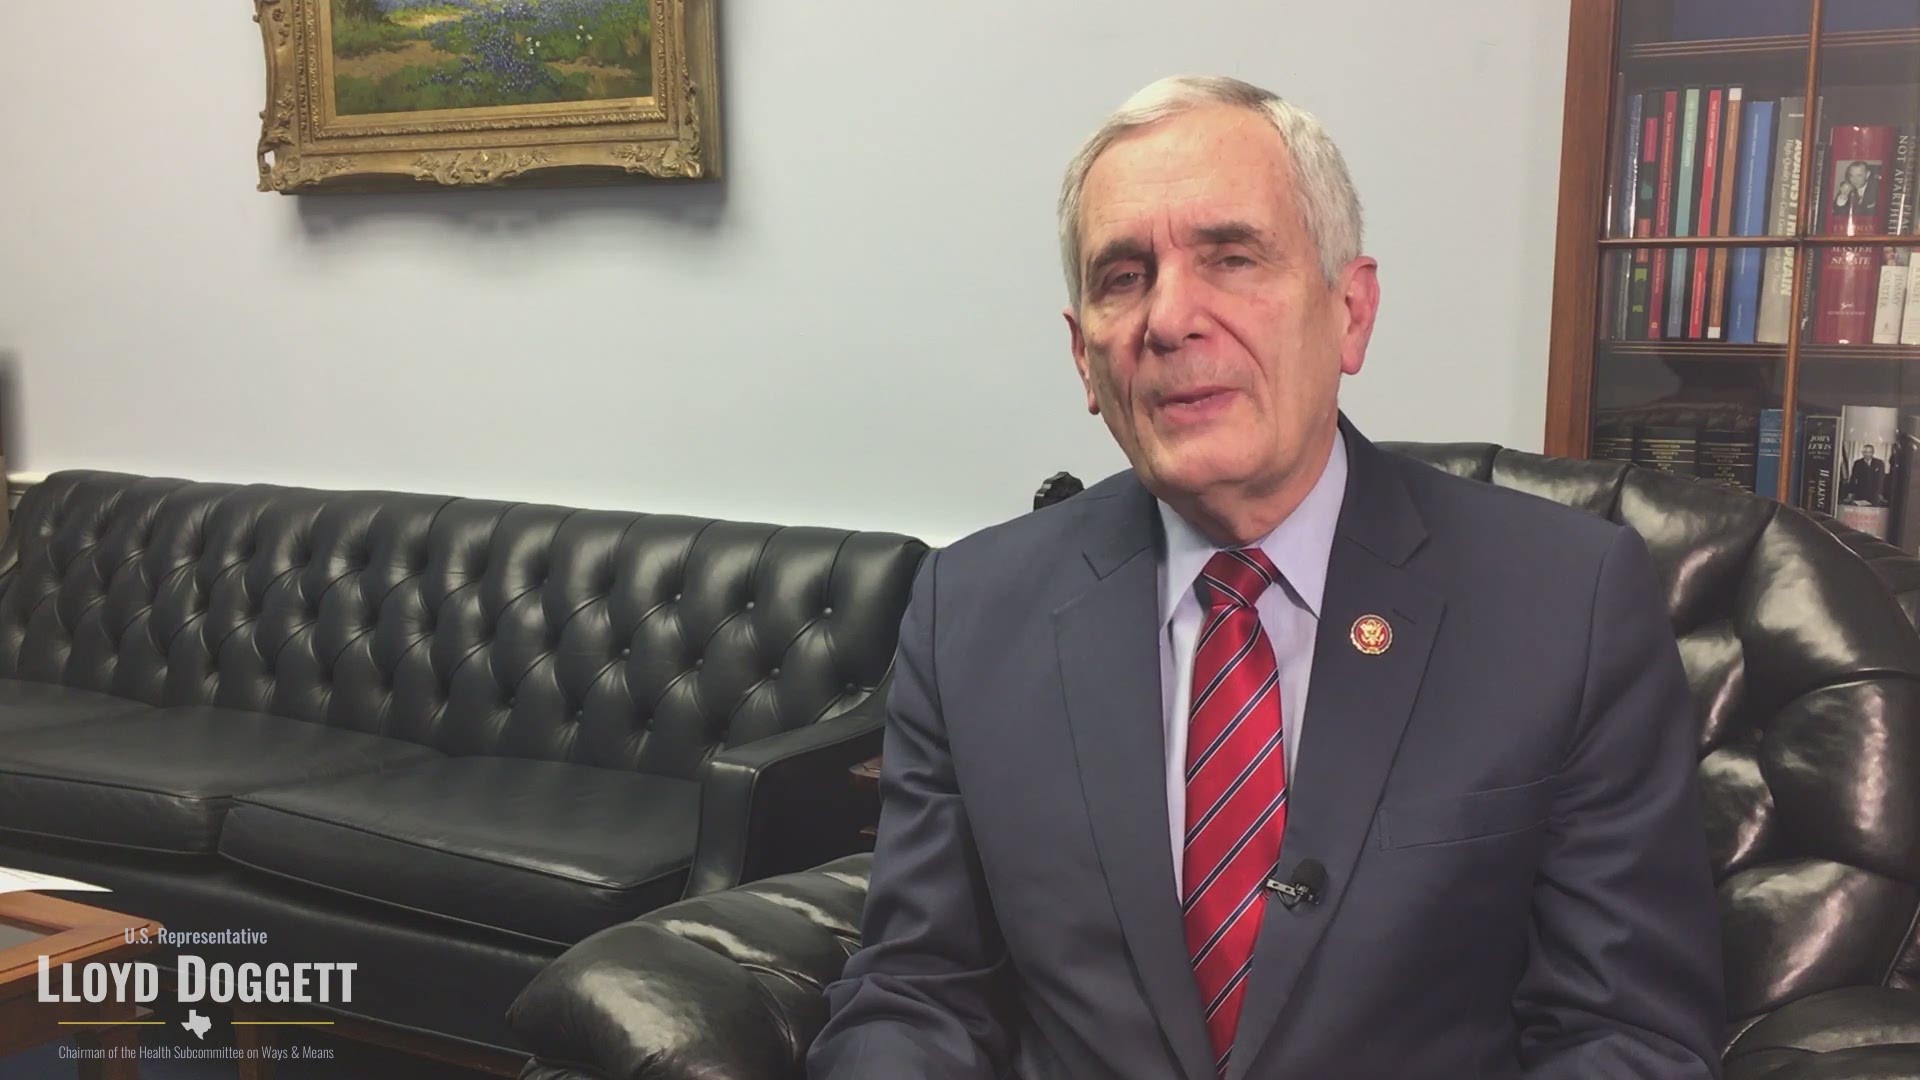 Congressman Llloyd Doggett vows to pursue changes in regulations regarding implanted medical devices.